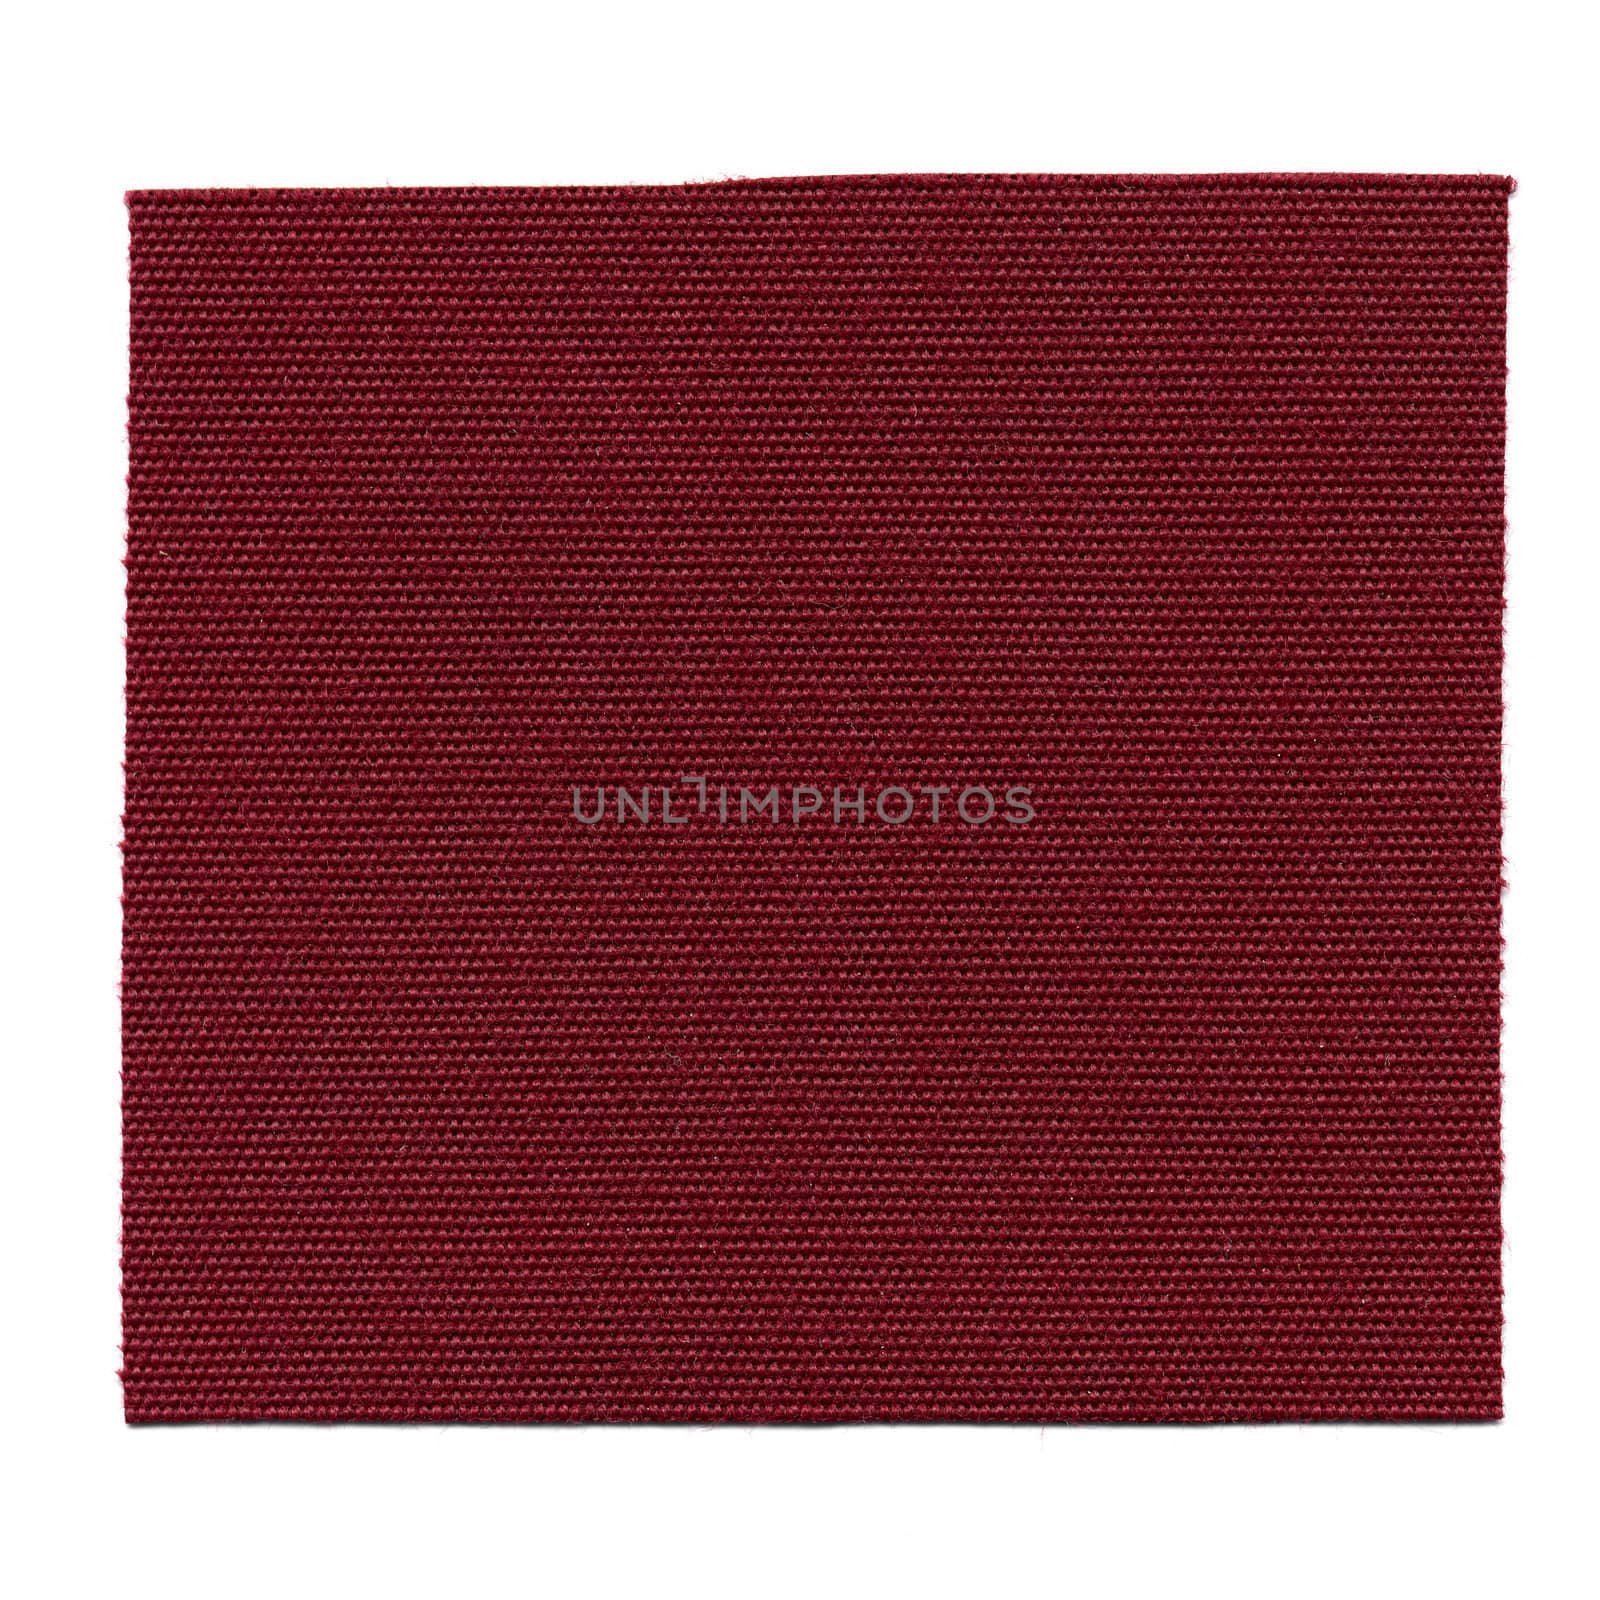 A fabric sample isolated over white background